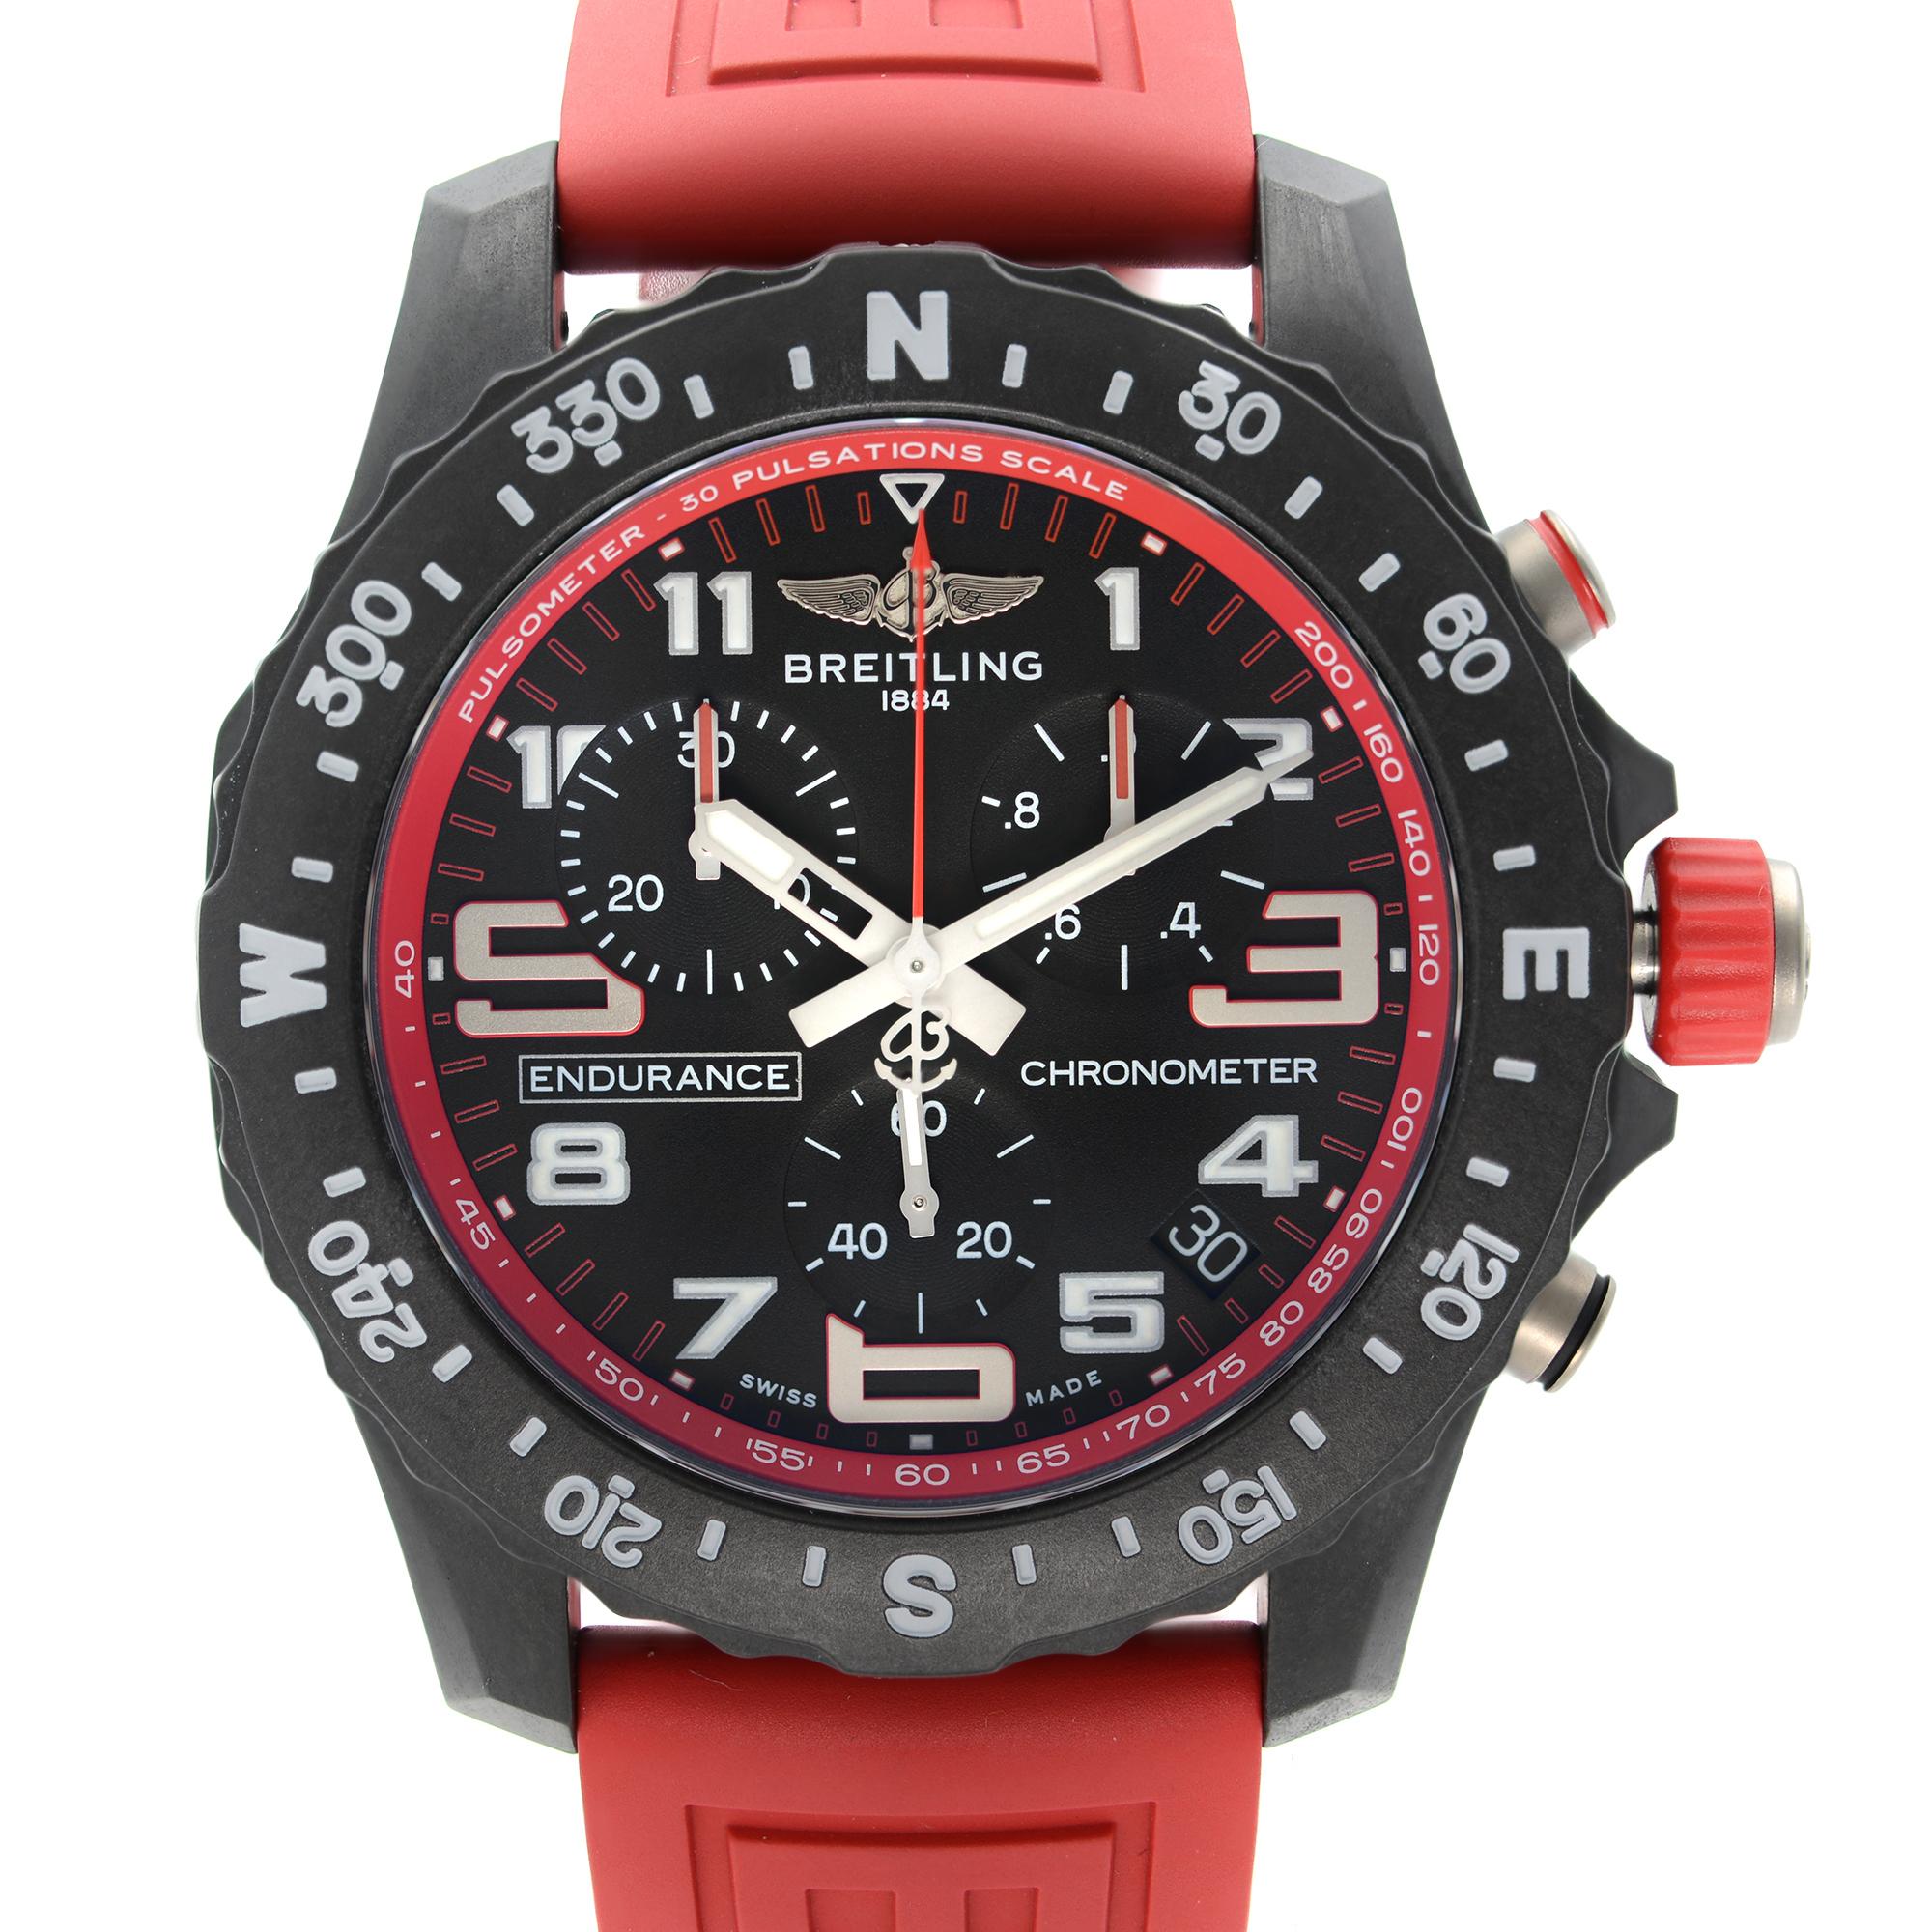 Unworn Breitling Endurance Pro Breitlight Men's Watch X82310D91B1S1. It Comes with Original Breitling Warranty Cards. This Beautiful Timepiece Features: Black Composite Case with A Red Rubber Strap, Black Composite Bezel, Black Dial with Silver-Tone